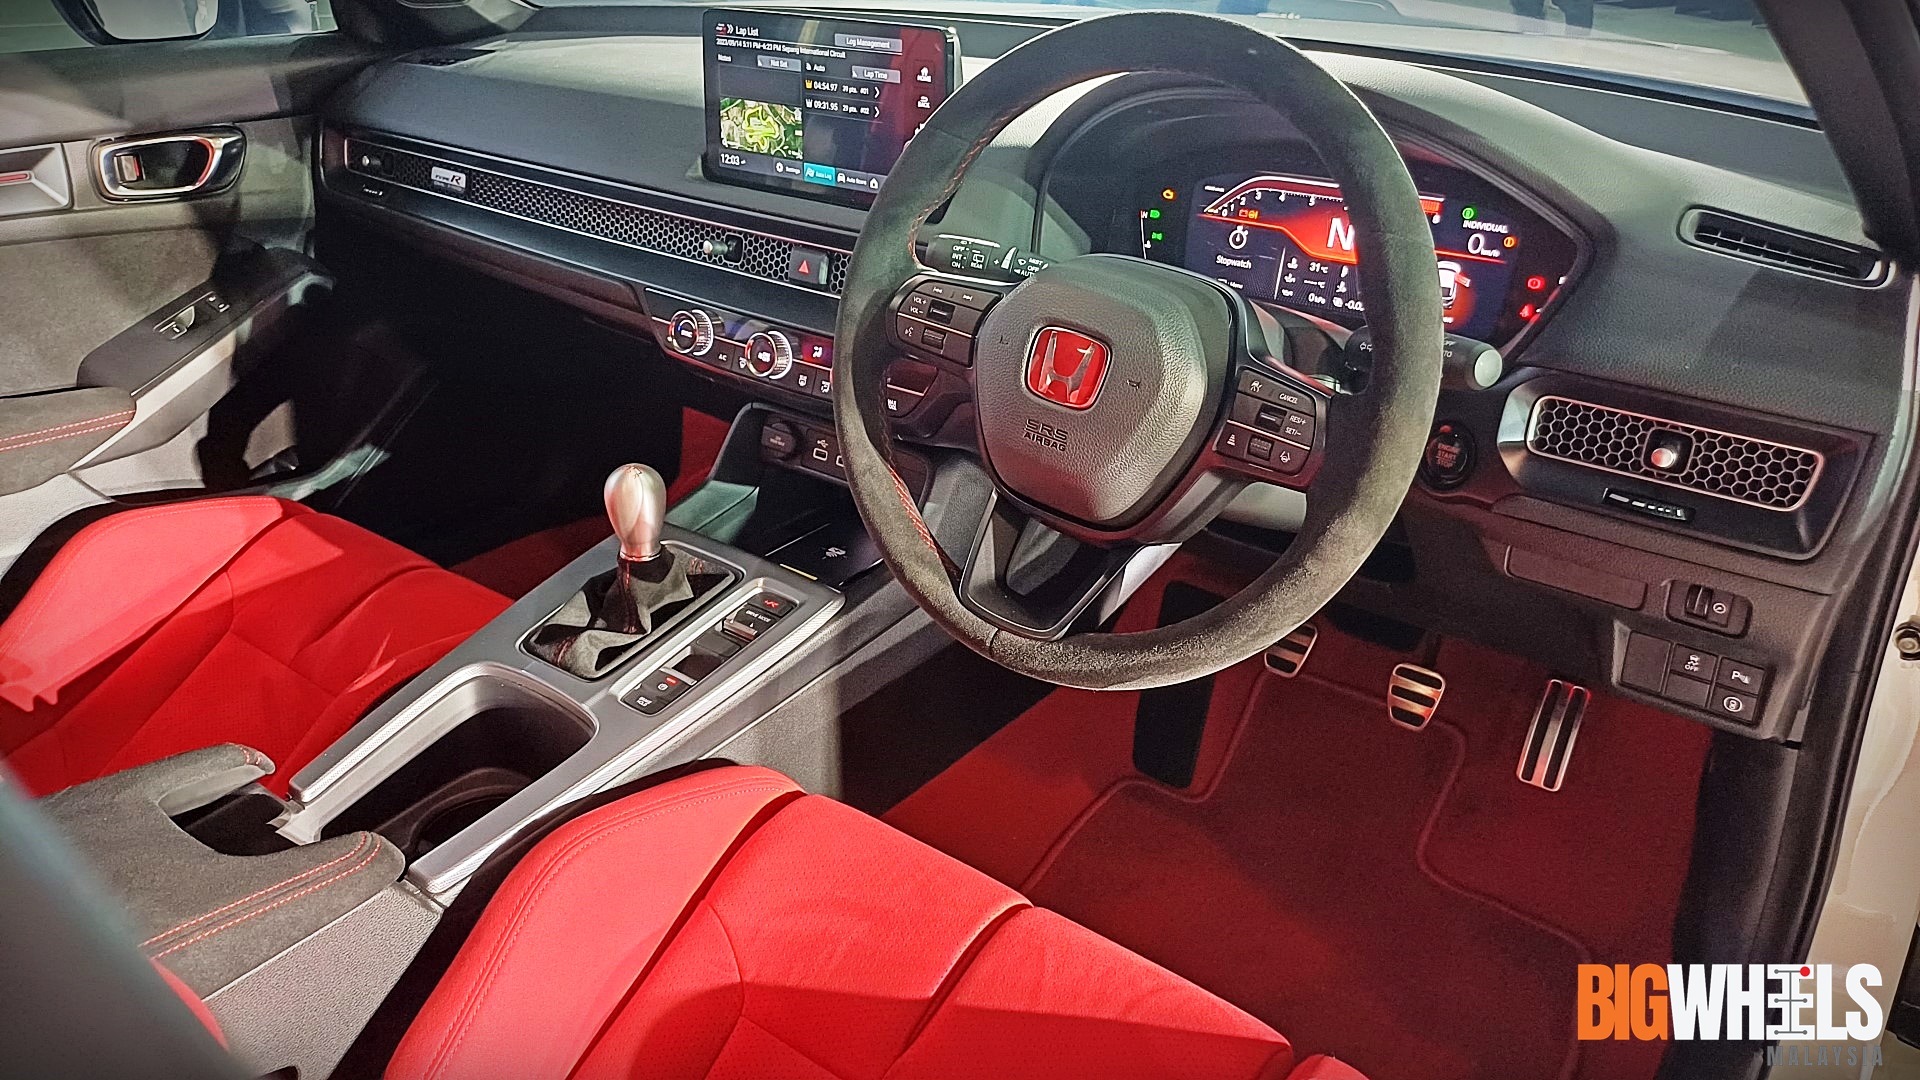 Honda Civic Type R FL5 now in Malaysia for RM399,999